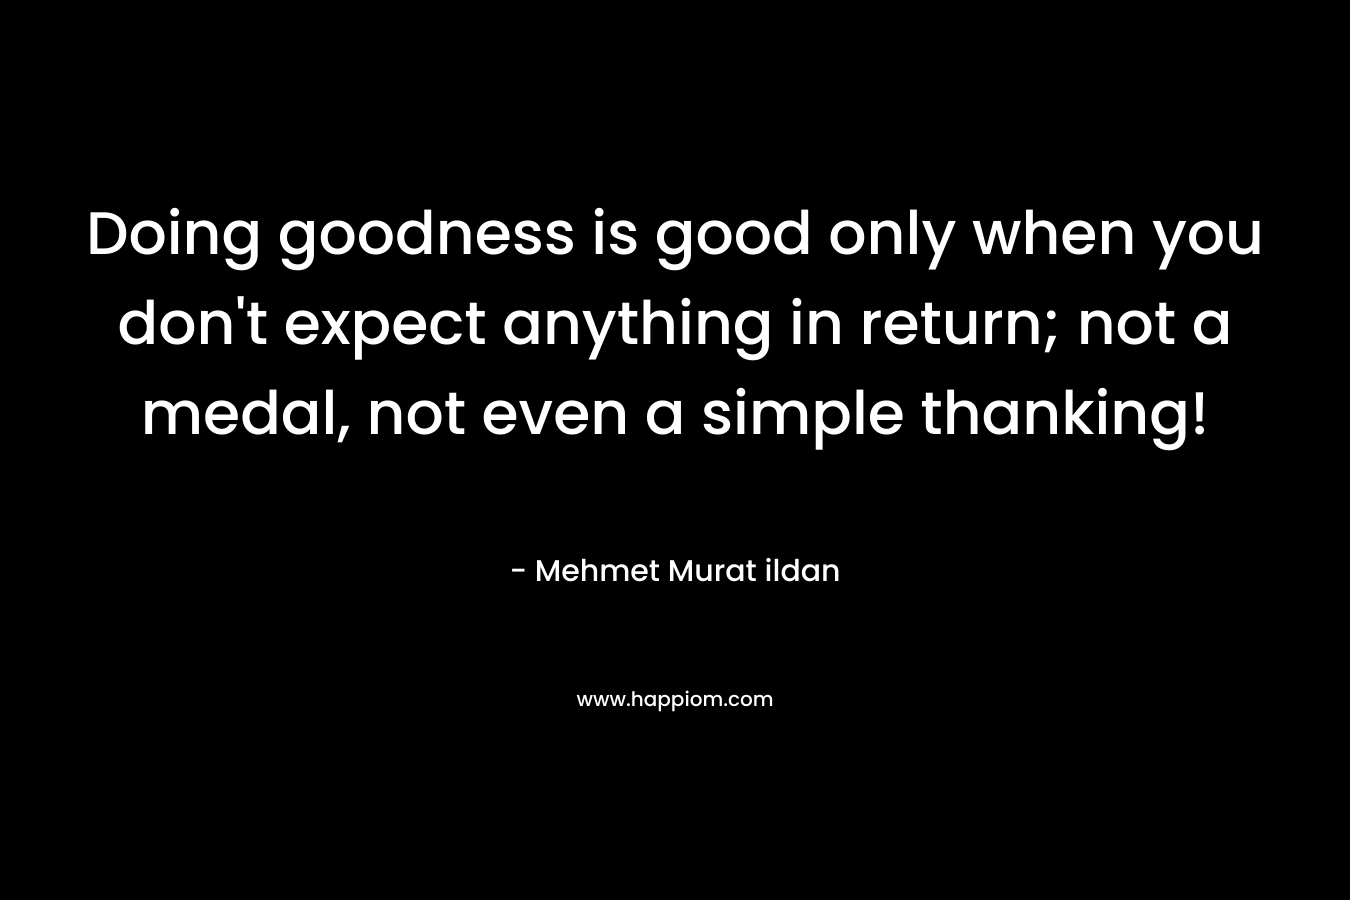 Doing goodness is good only when you don’t expect anything in return; not a medal, not even a simple thanking! – Mehmet Murat ildan